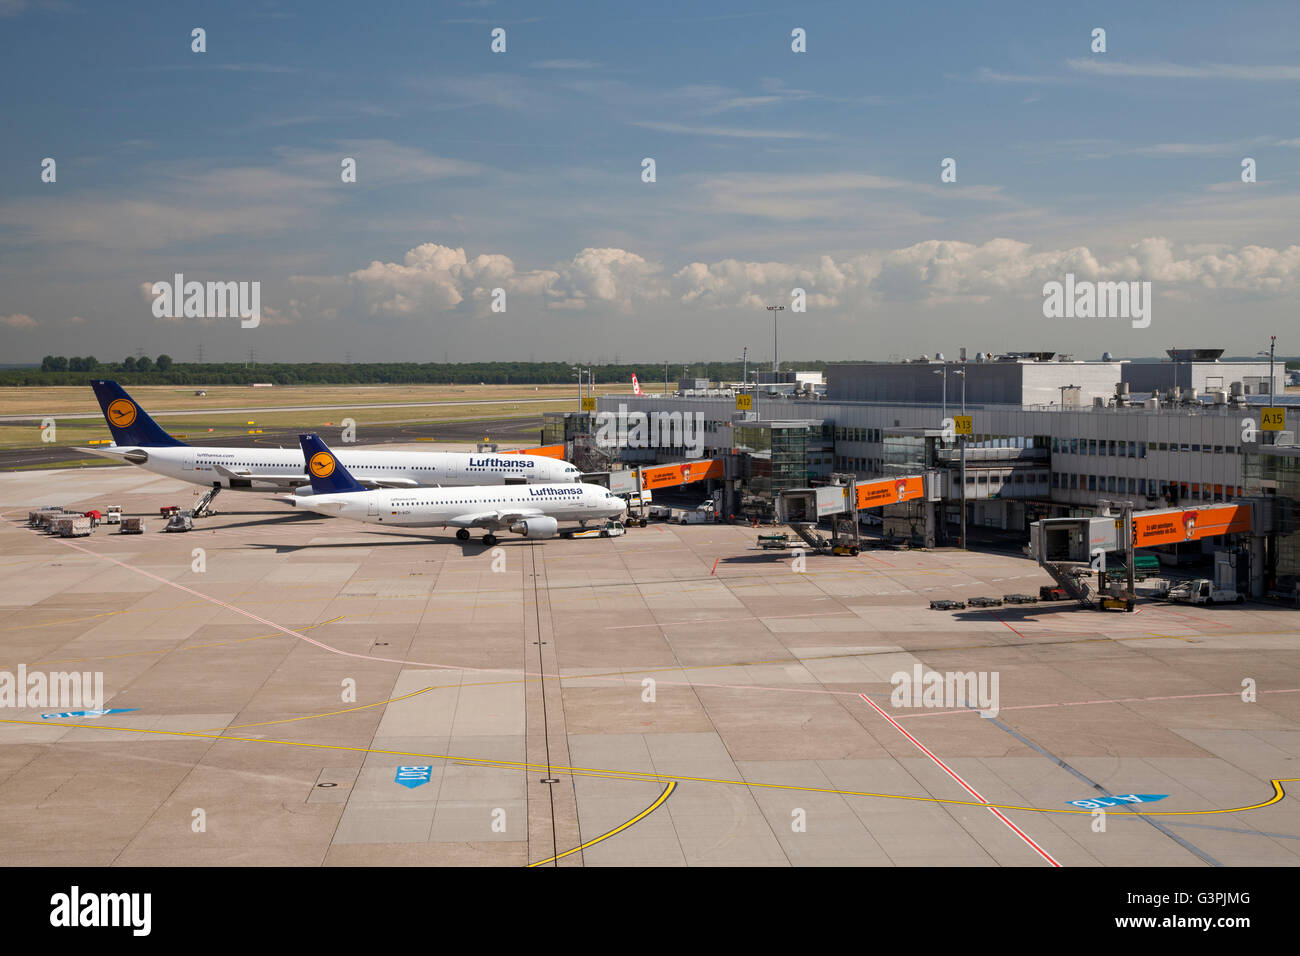 Lufthansa aircraft at the gate, Airbus A320-200 and Airbus A340-300, Duesseldorf Airport, Rhineland region Stock Photo